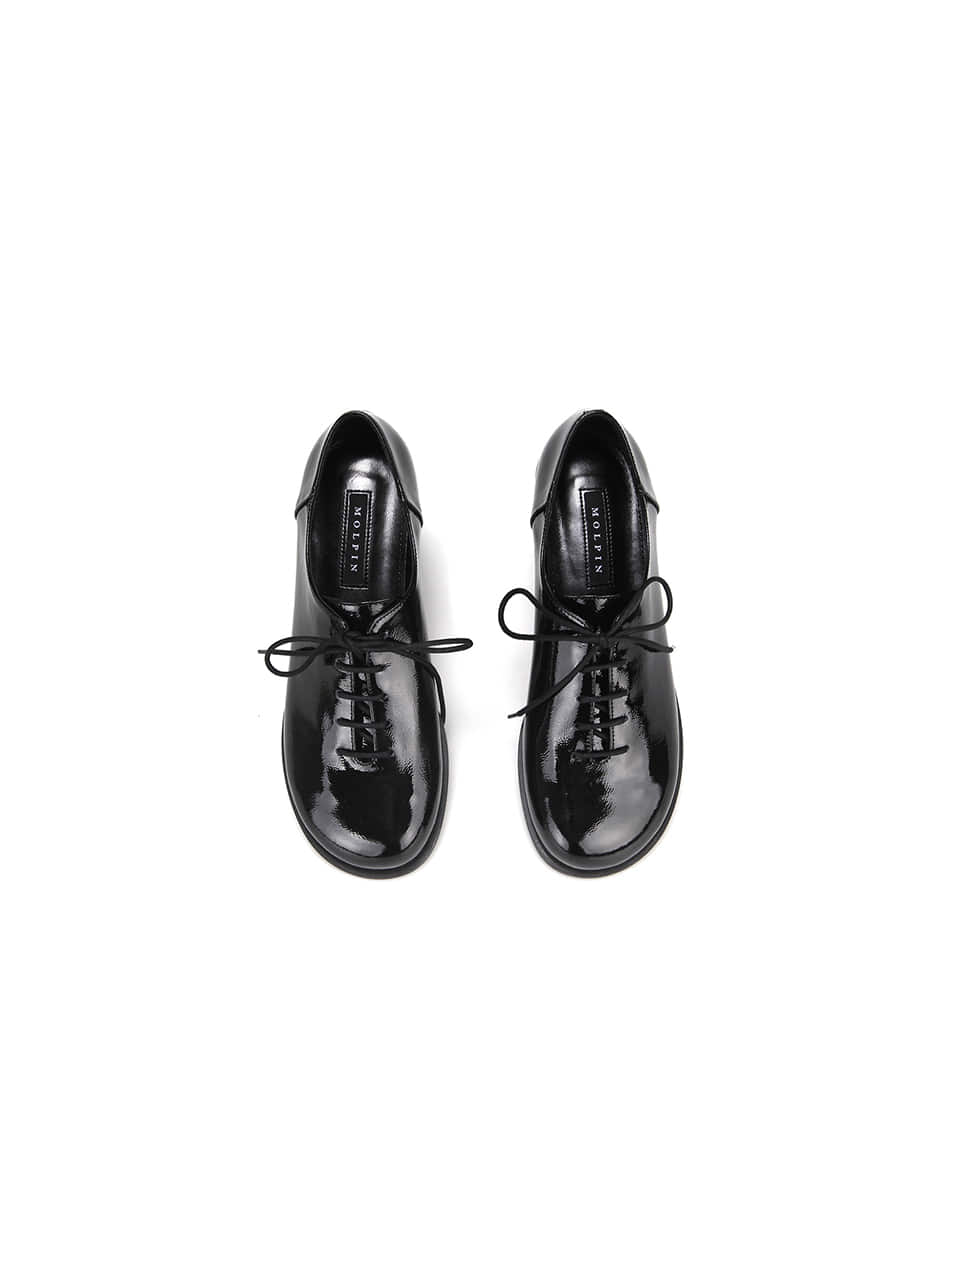 Cring Laceup Loafer_22014_black